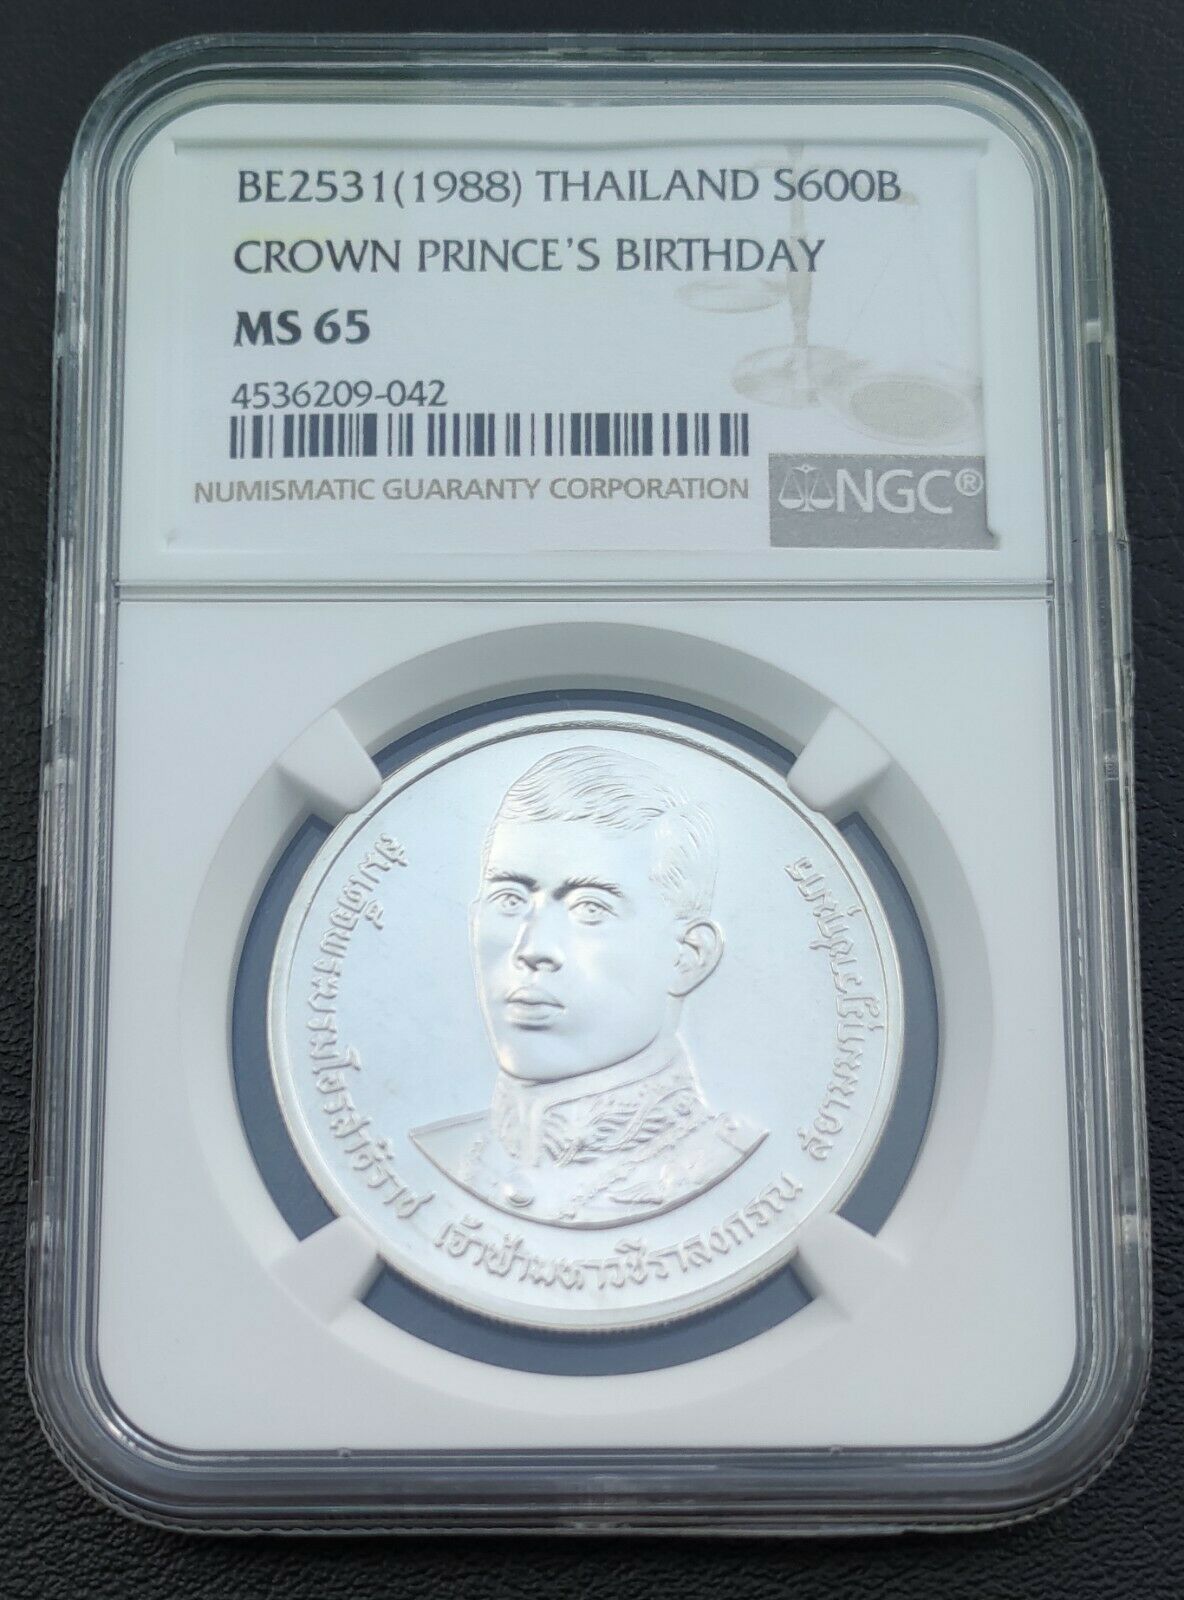 THAILAND 600 BAHT 2531 (1988) 36TH BIRTHDAY OF CROWN PRINCE SILVER COIN NGC MS65